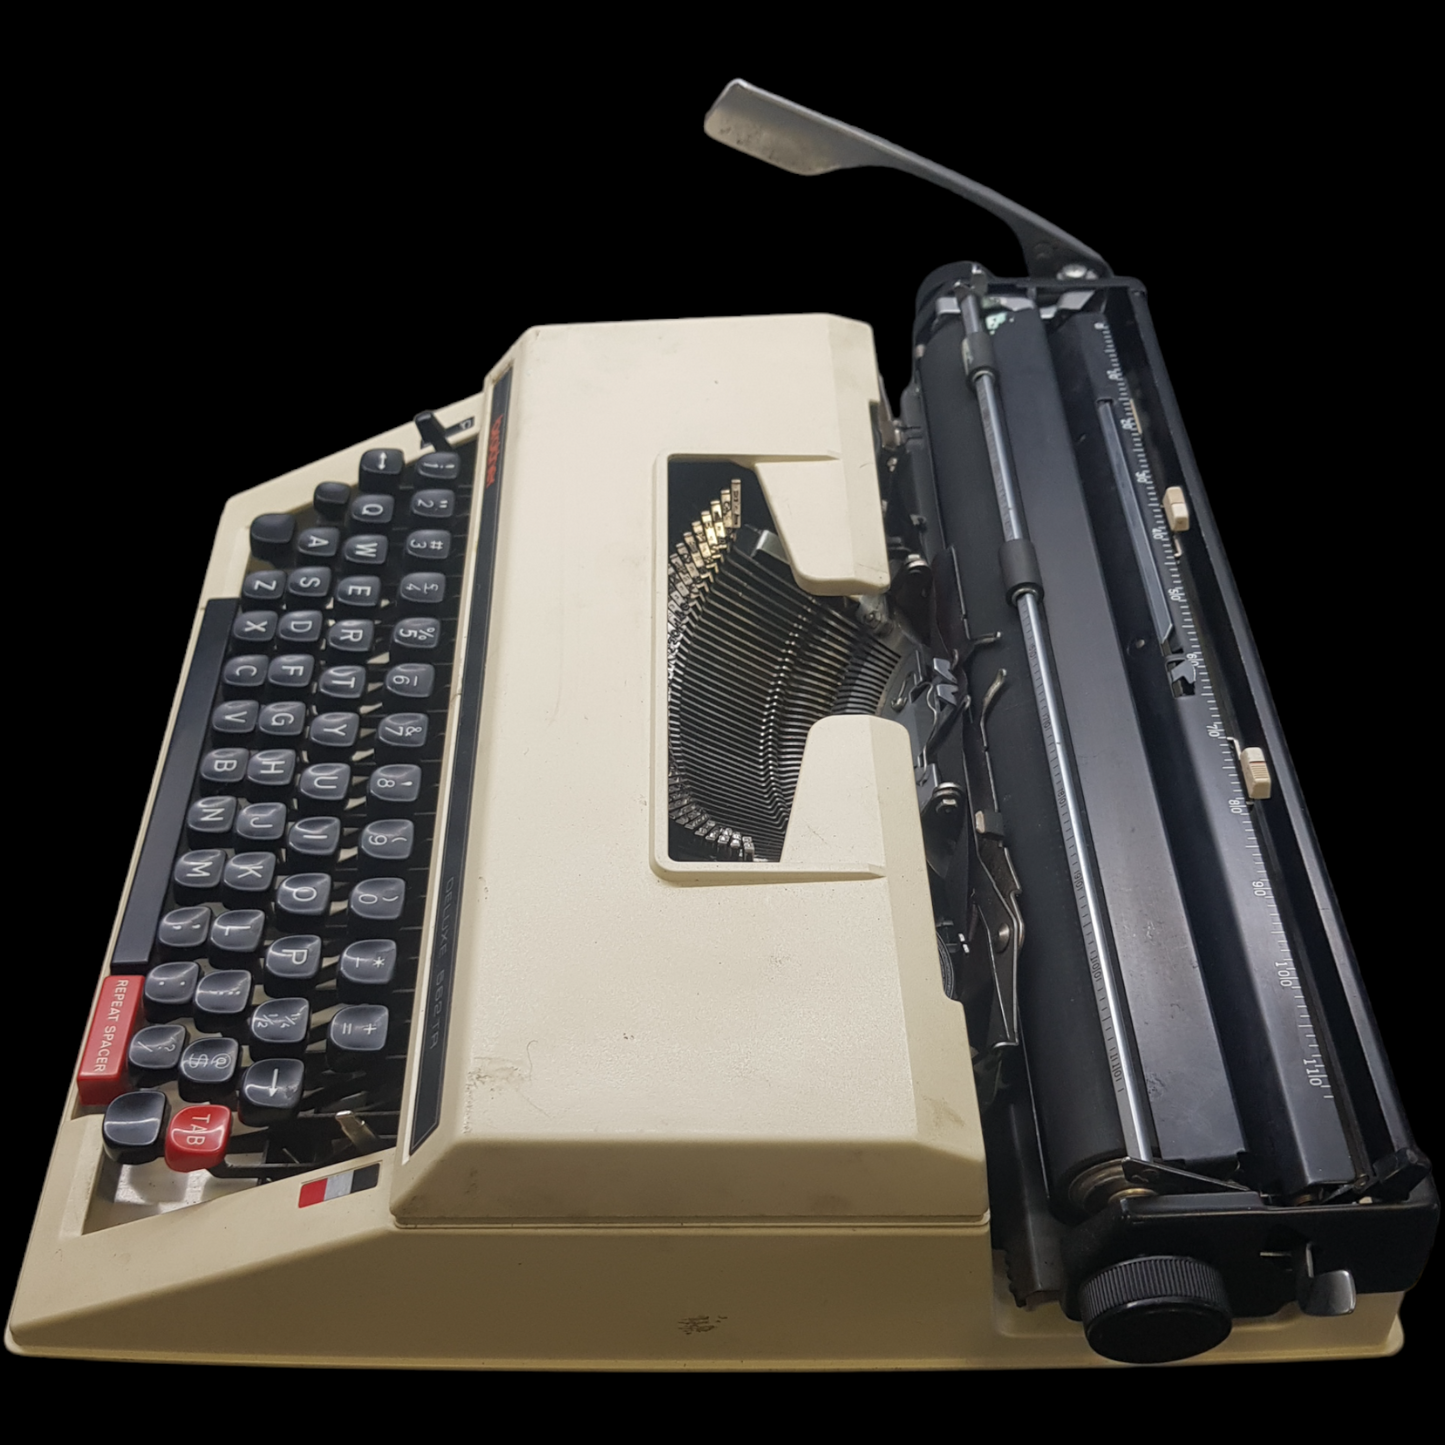 Image of Brother 562 TR Typewriter. Portable Typewriter. Fibre Body with TAB. Made in Japan. Available from universaltypewritercompany.in.